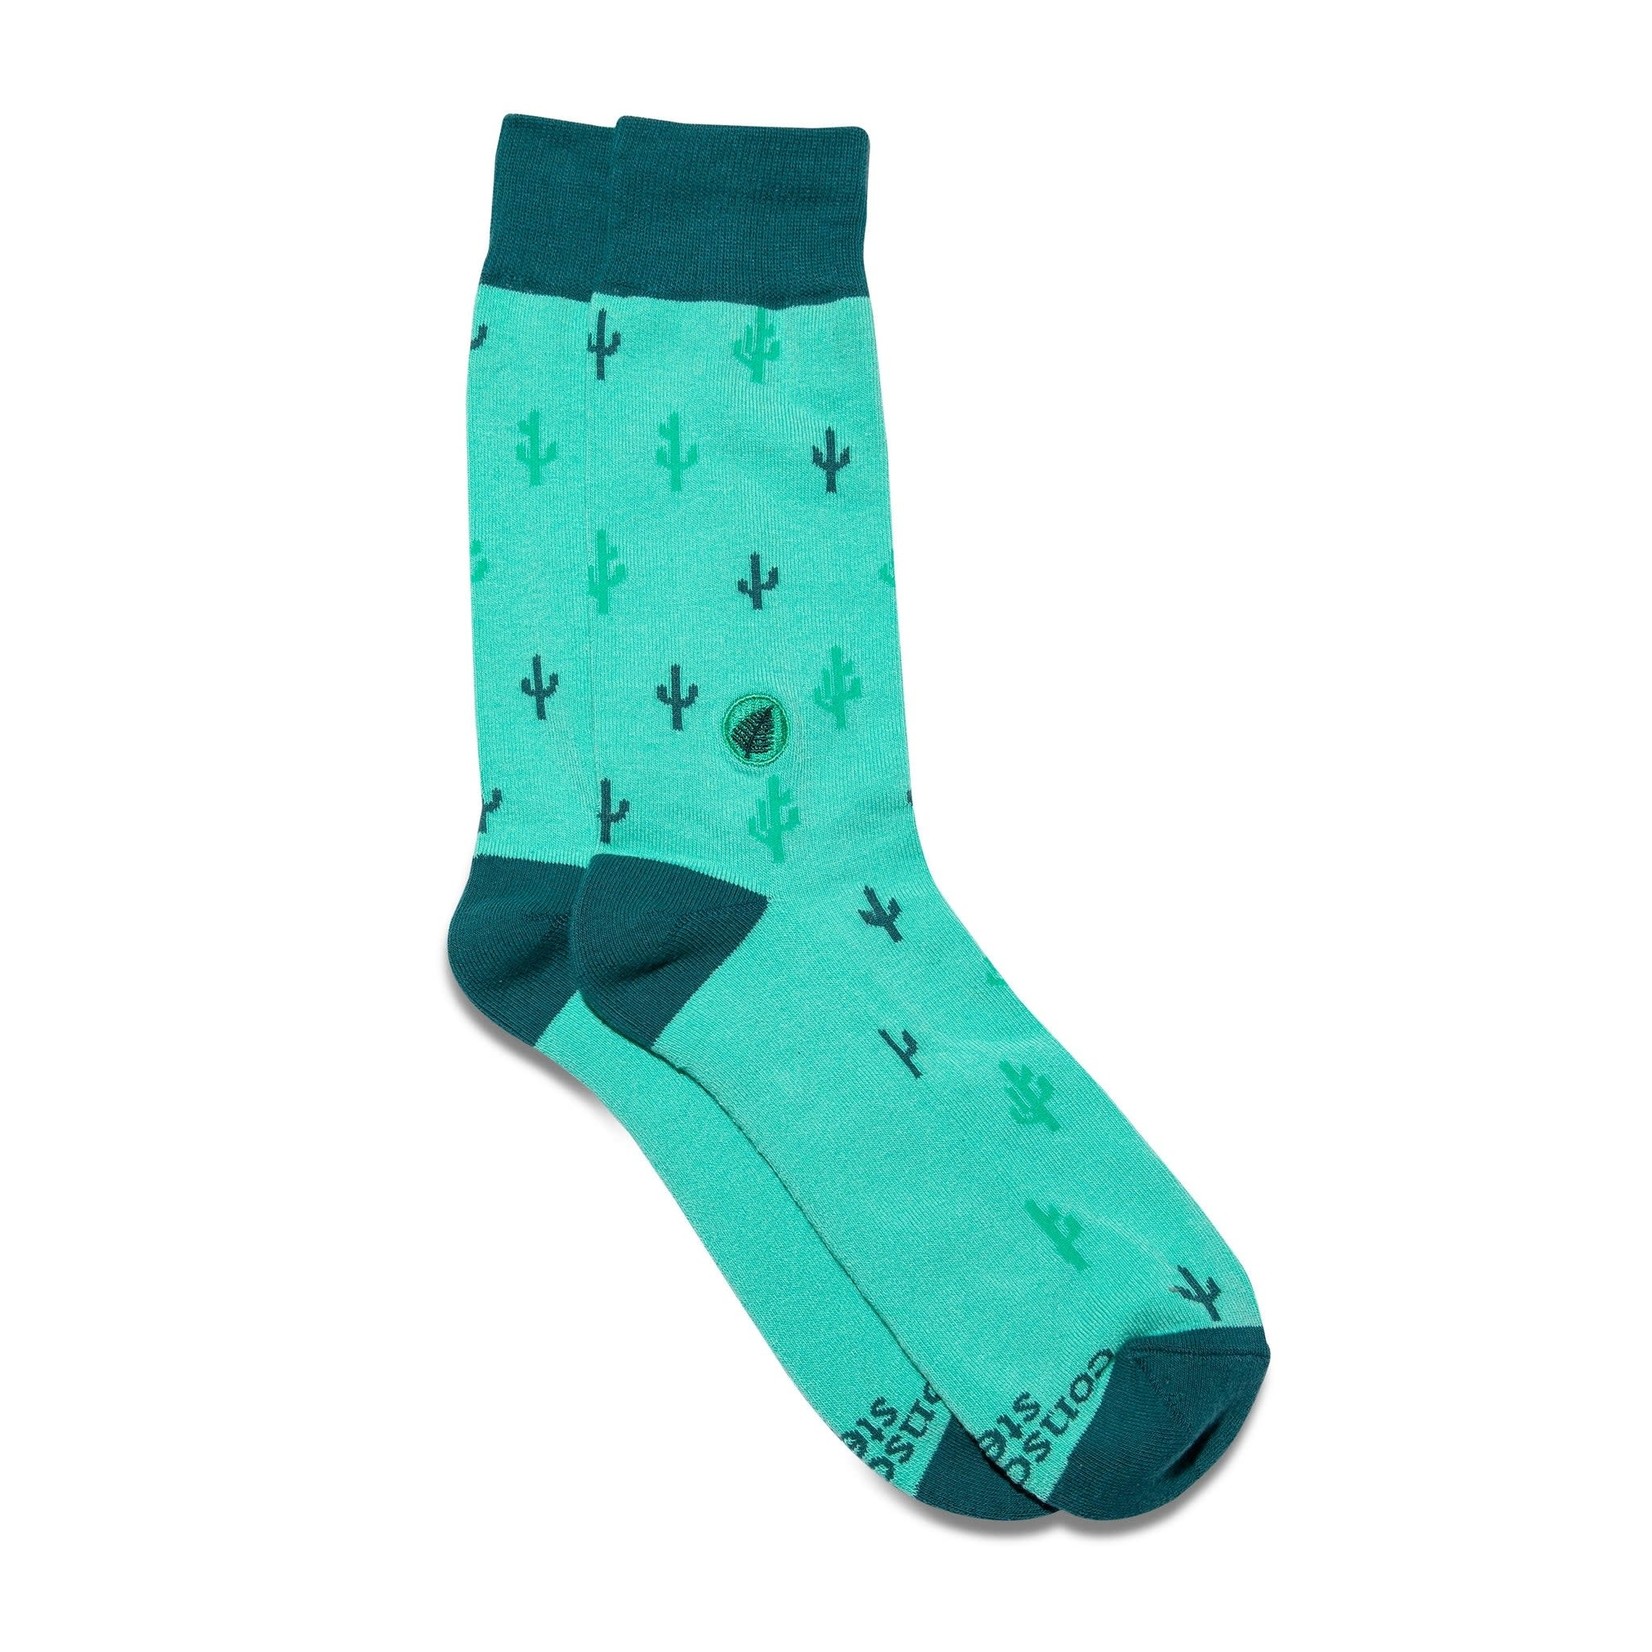 Conscious Step Conscious Step Socks That Protect Tropical Rainforests, Cactus, Small